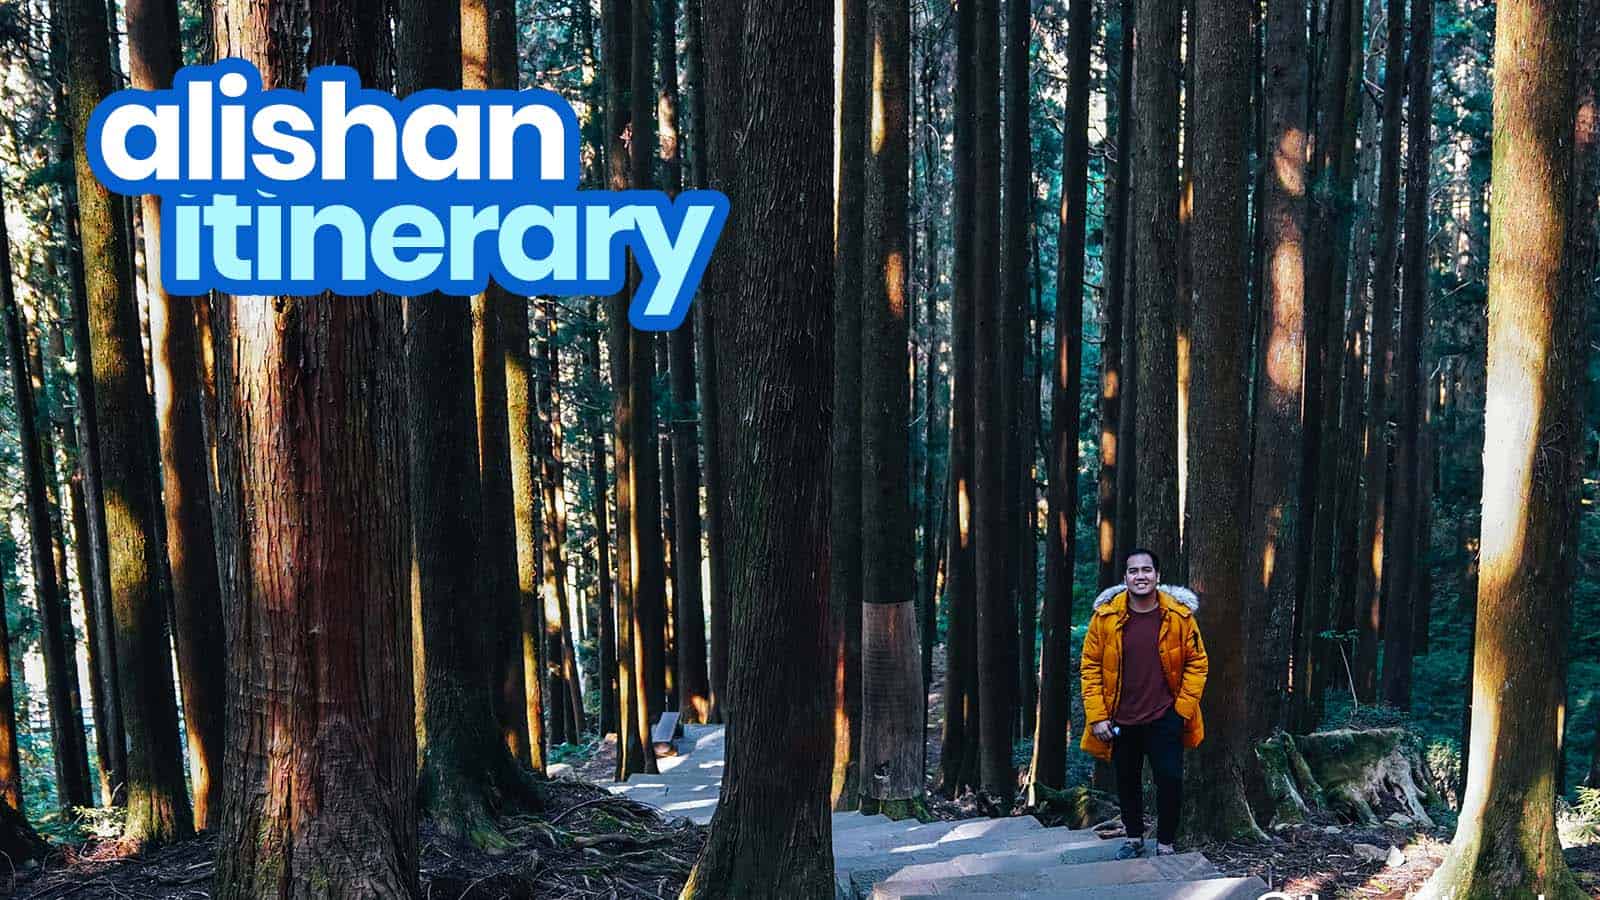 ALISHAN ITINERARY: 12 Best Things to Do & Places to Visit